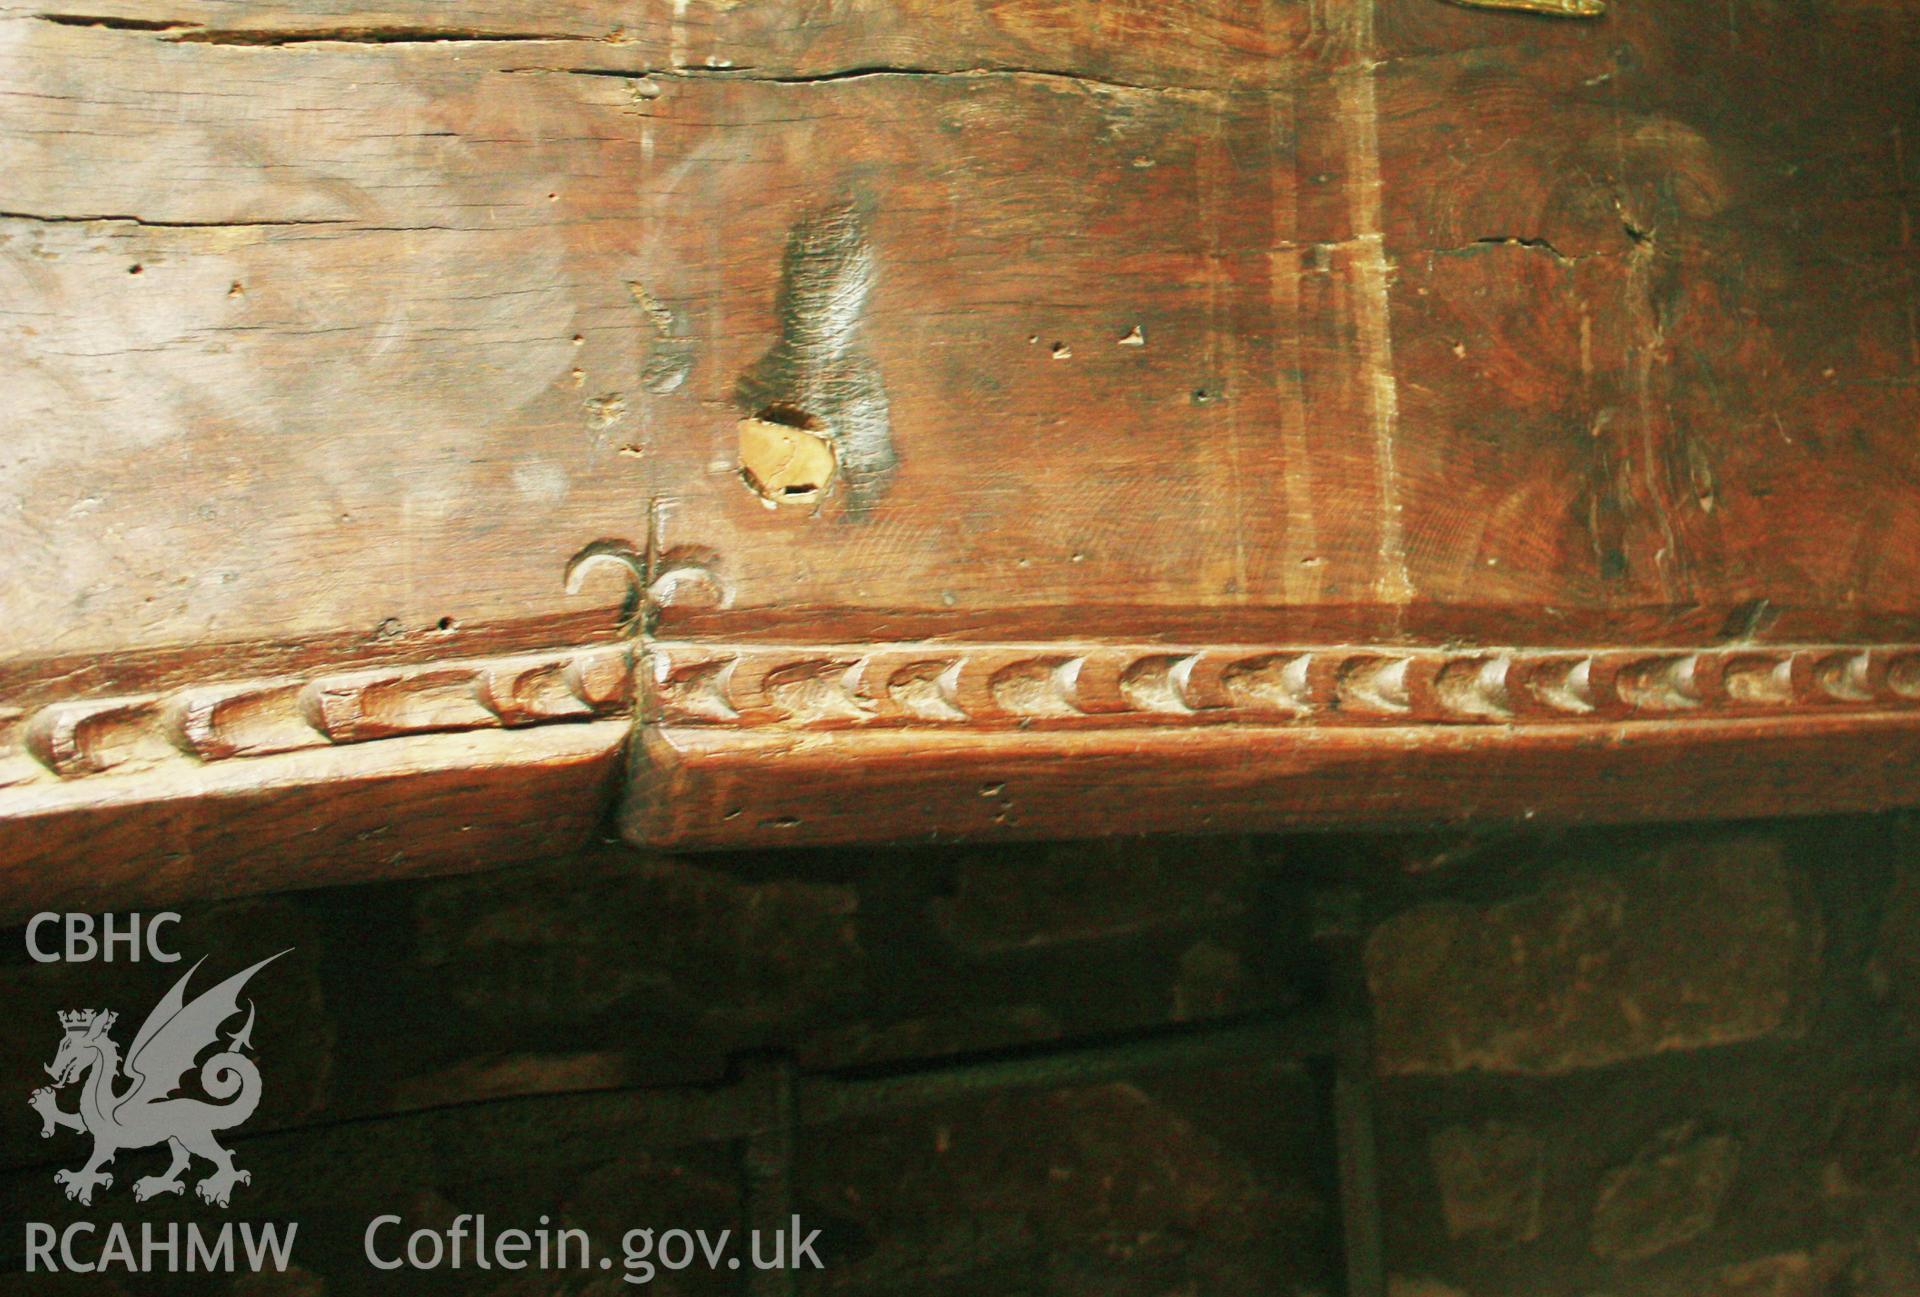 Detail on wooden beam above fireplace at Glanhafon-Fawr Farmhouse. Photographic survey of Glanhafon-Fawr Farmhouse conducted by Geoff Ward on 4th November 2010.